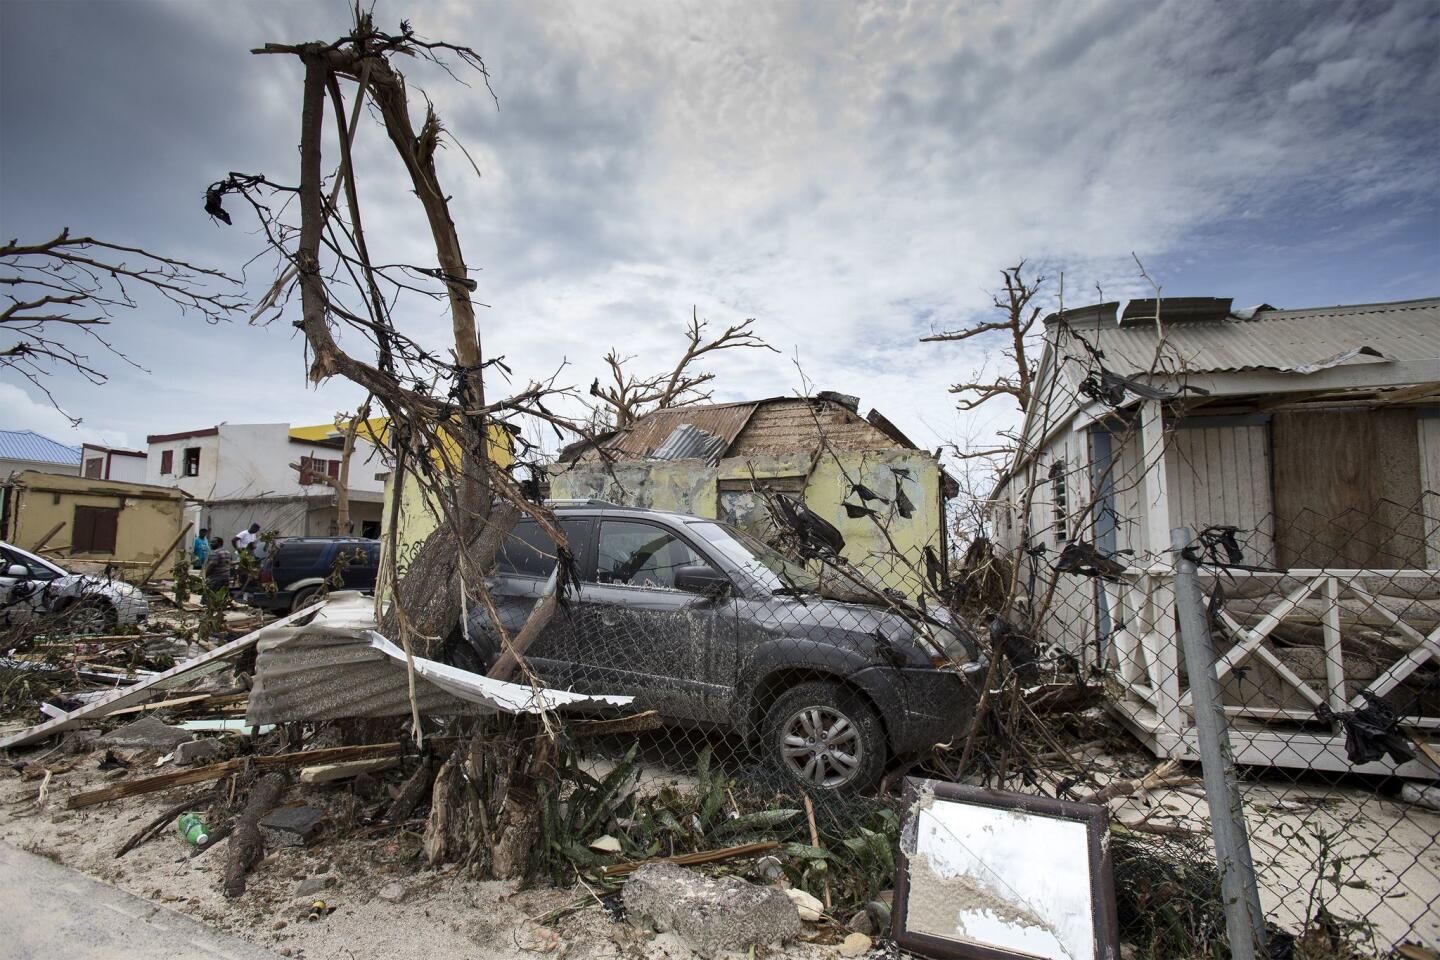 Homes and cars damaged after the passage of Hurricane Irma on the Dutch Caribbean island of Saint Martin.